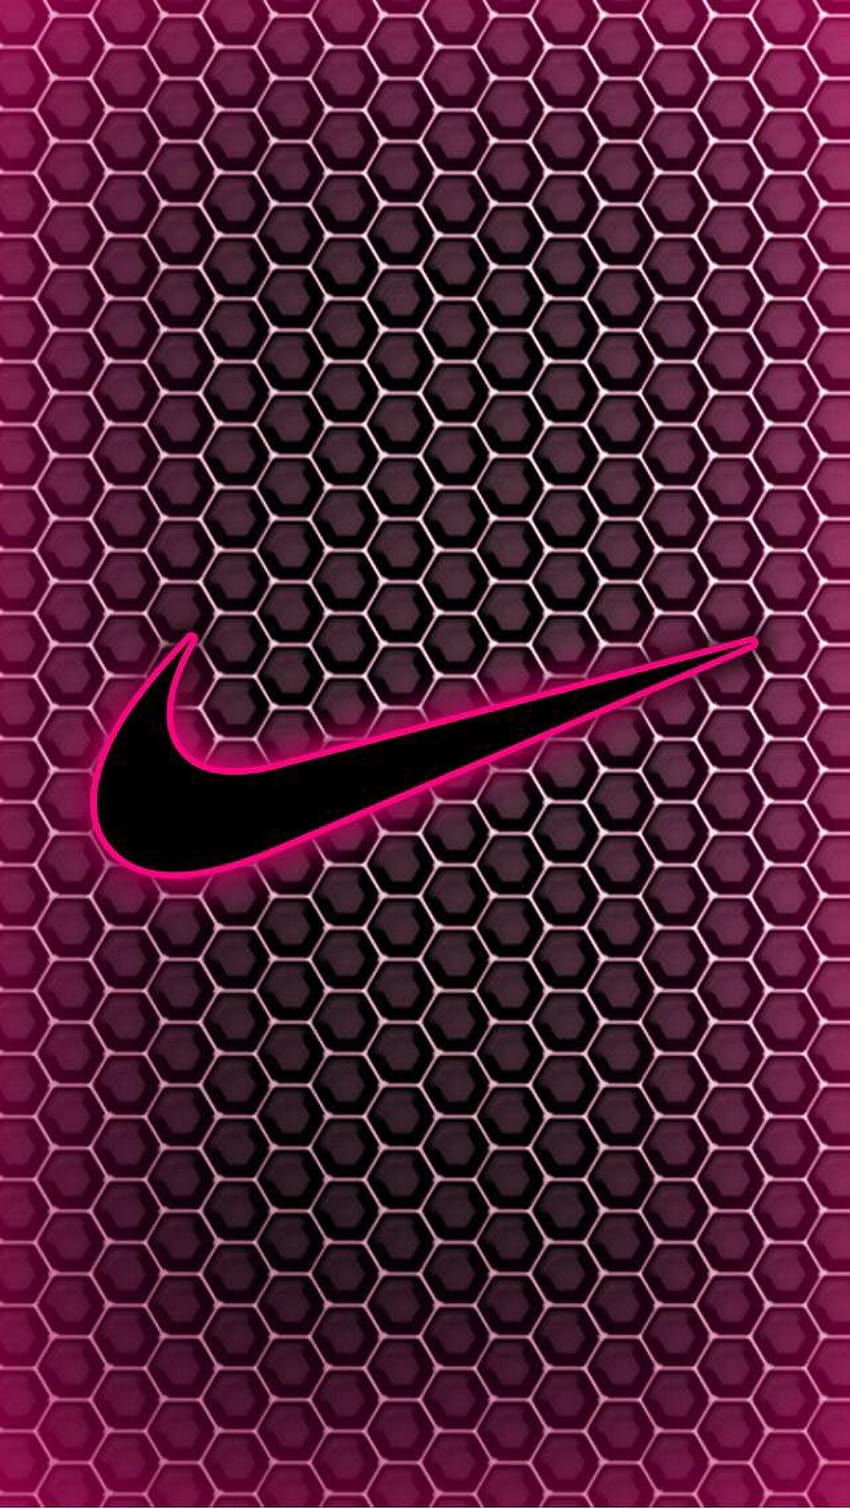 Pin by Hooter's Konceptz on Nike wallpaper  Nike wallpaper, Louis vuitton  iphone wallpaper, Wallpaper